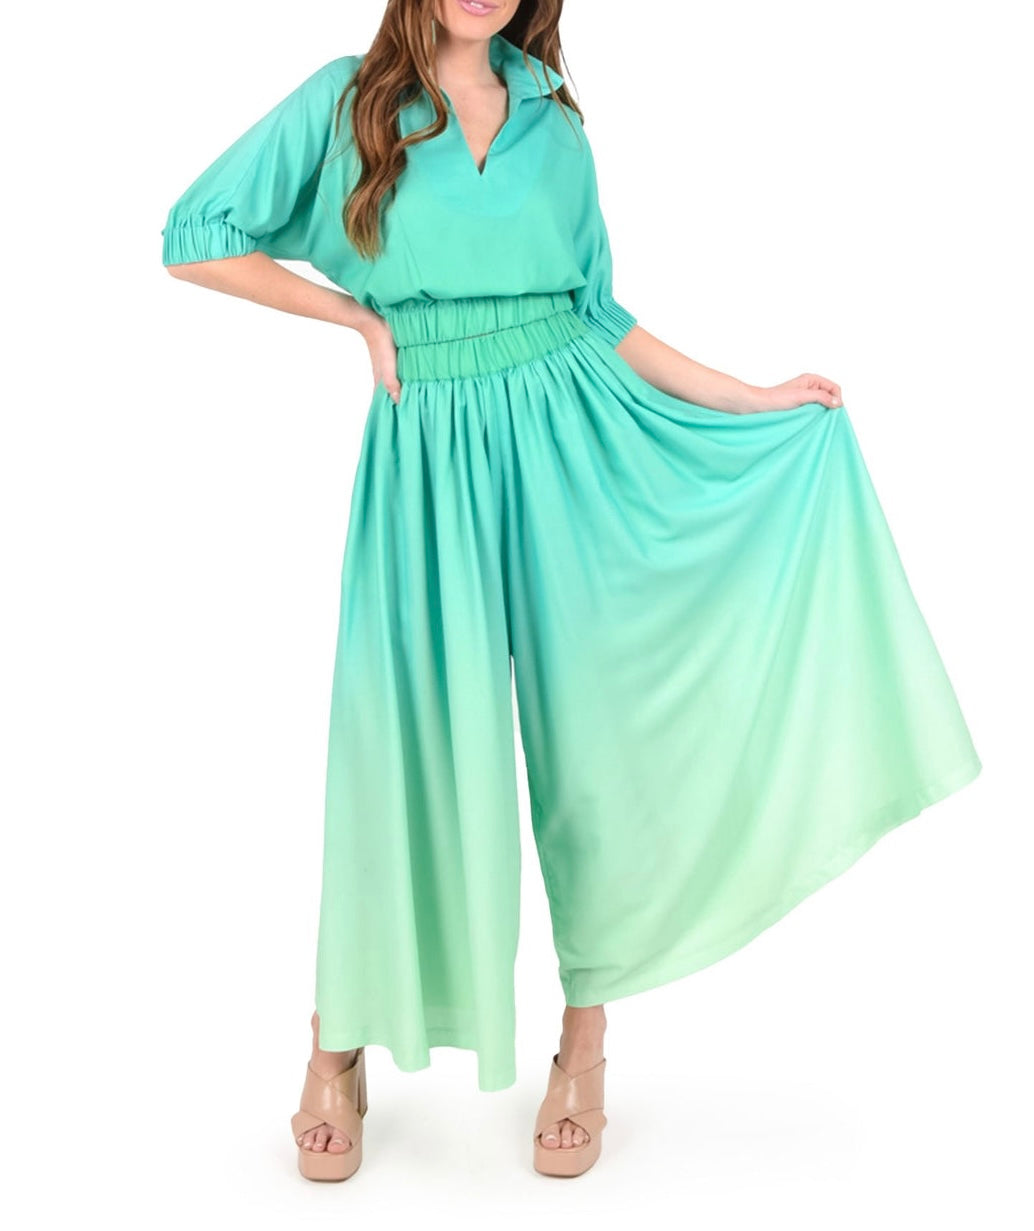 Palazzo Pant in Mint Mist by Emily McCarthy